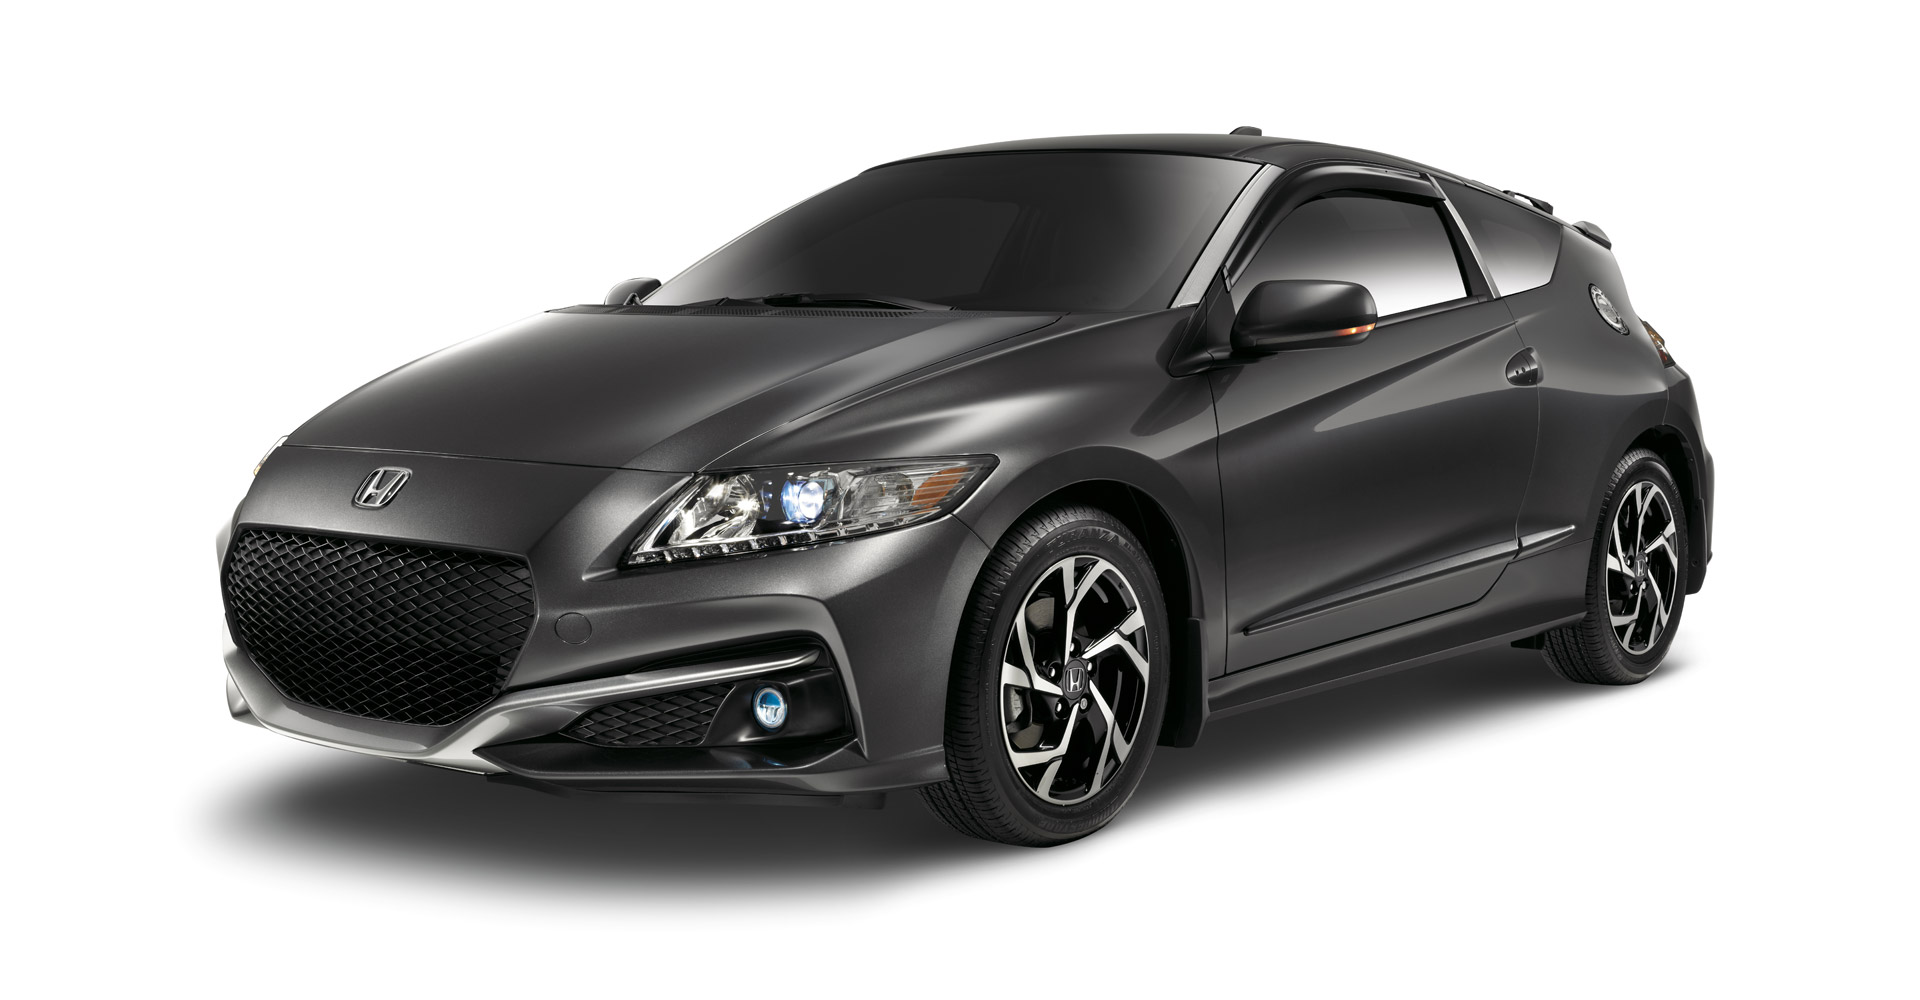 New And Used Honda Cr Z Prices Photos Reviews Specs The Car Connection